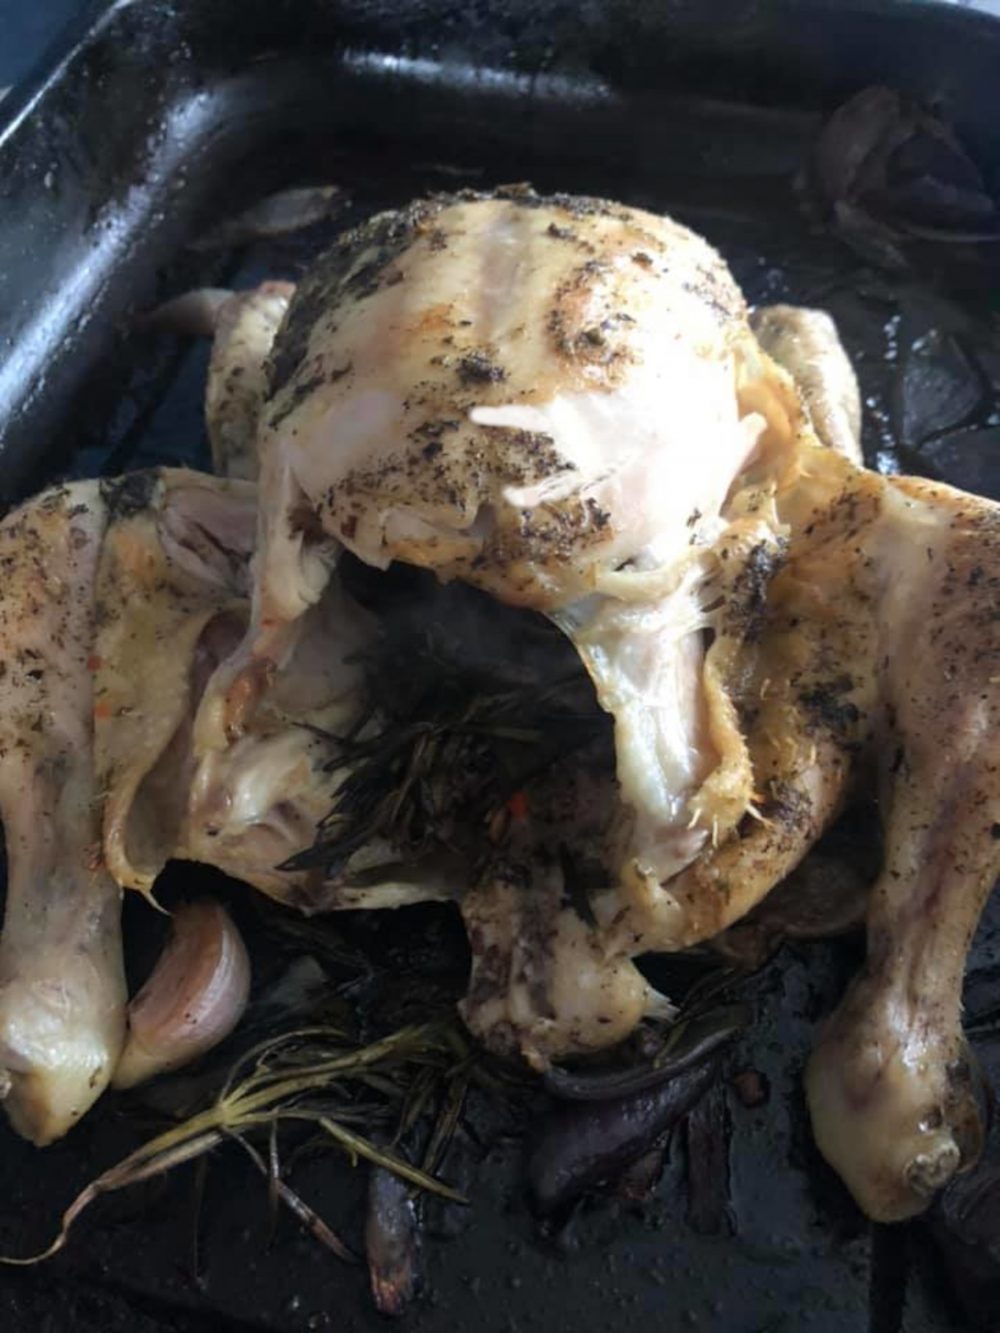 Whole Tesco chicken has feed filled stomach | Food and Drink News UK